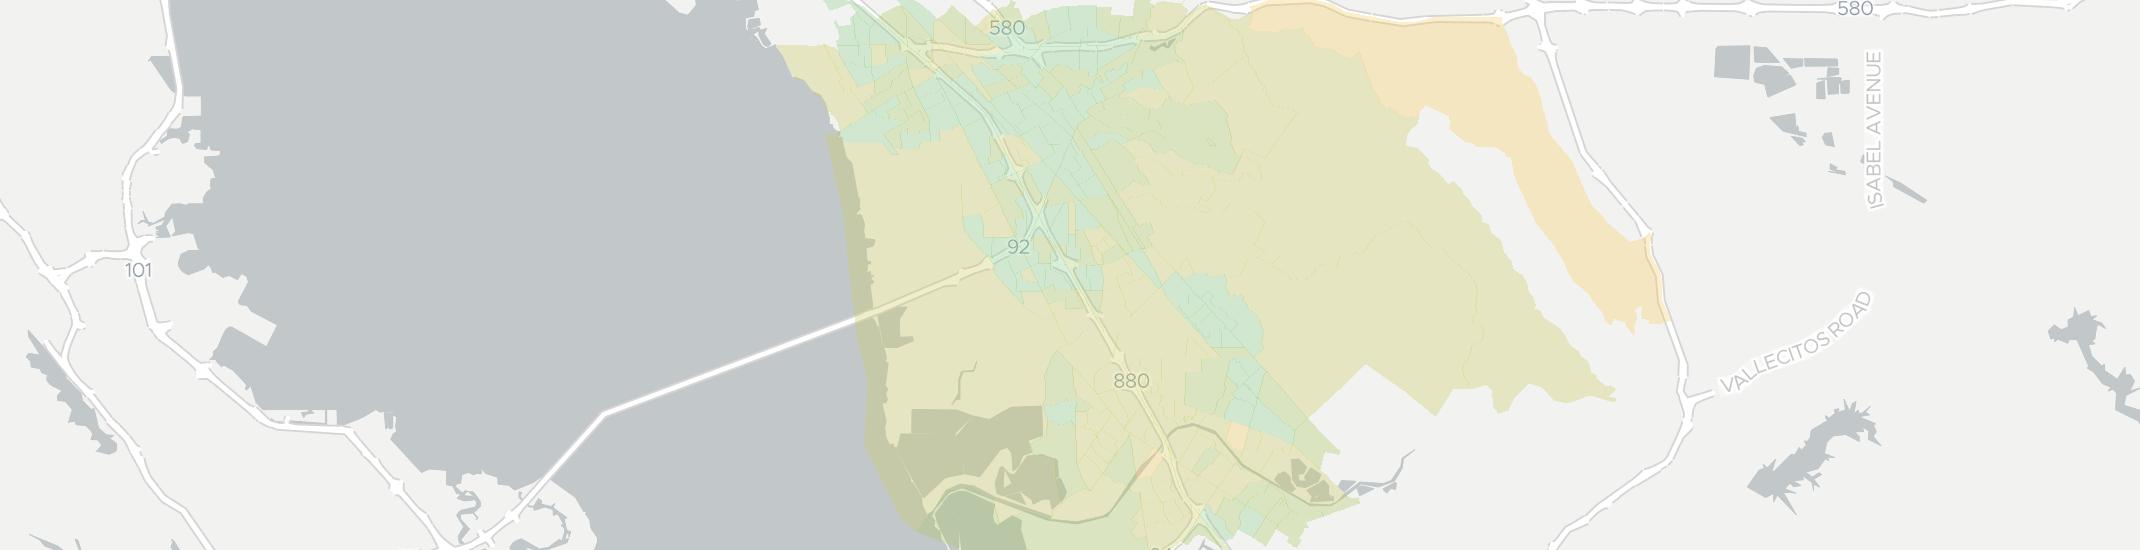 Hayward Internet Competition Map. Click for interactive map.